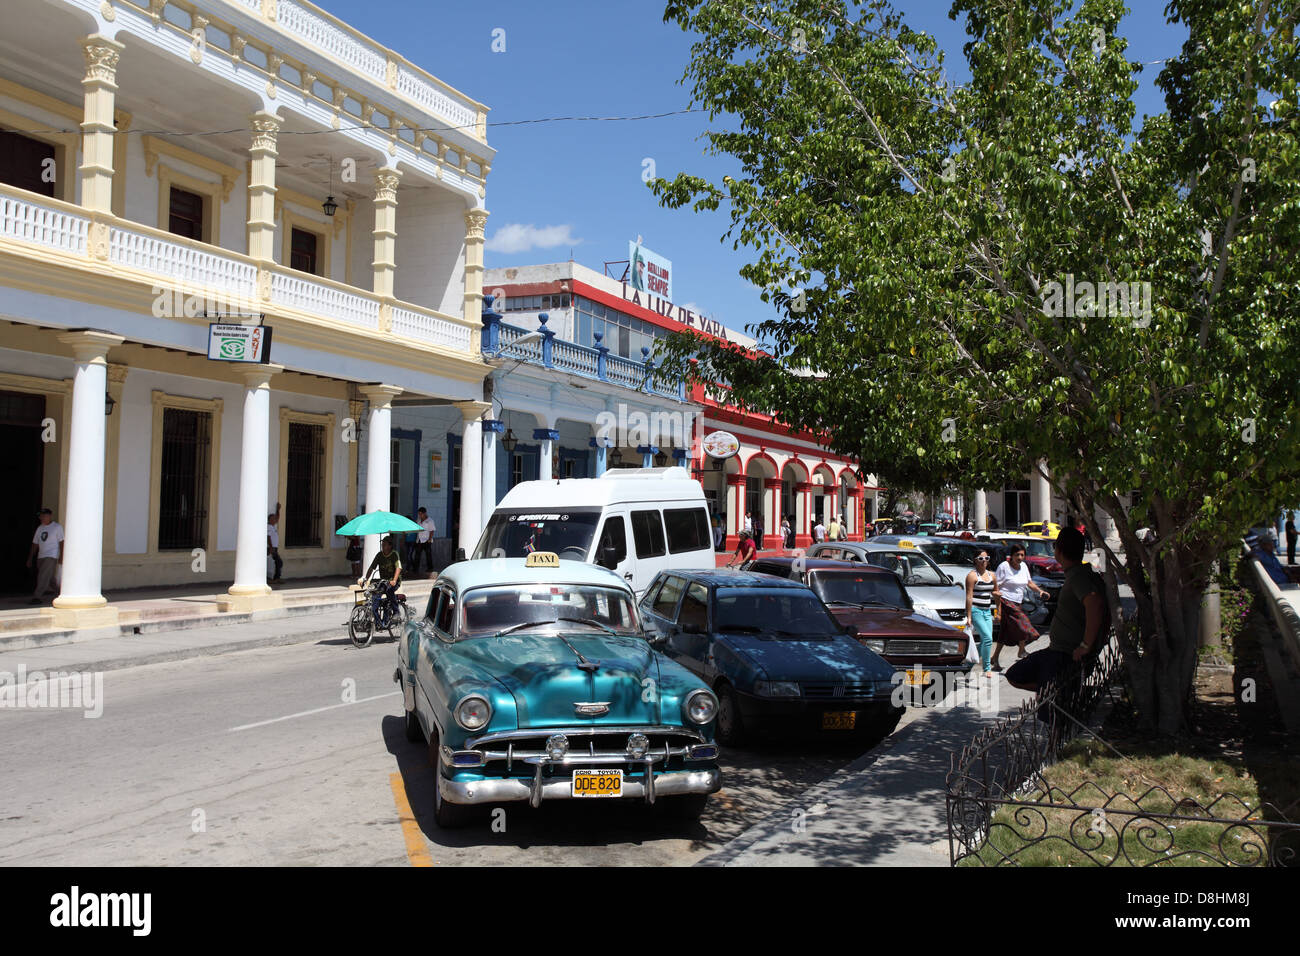 Holguin city centre with old classic American cars parked in the street, Cuba Stock Photo